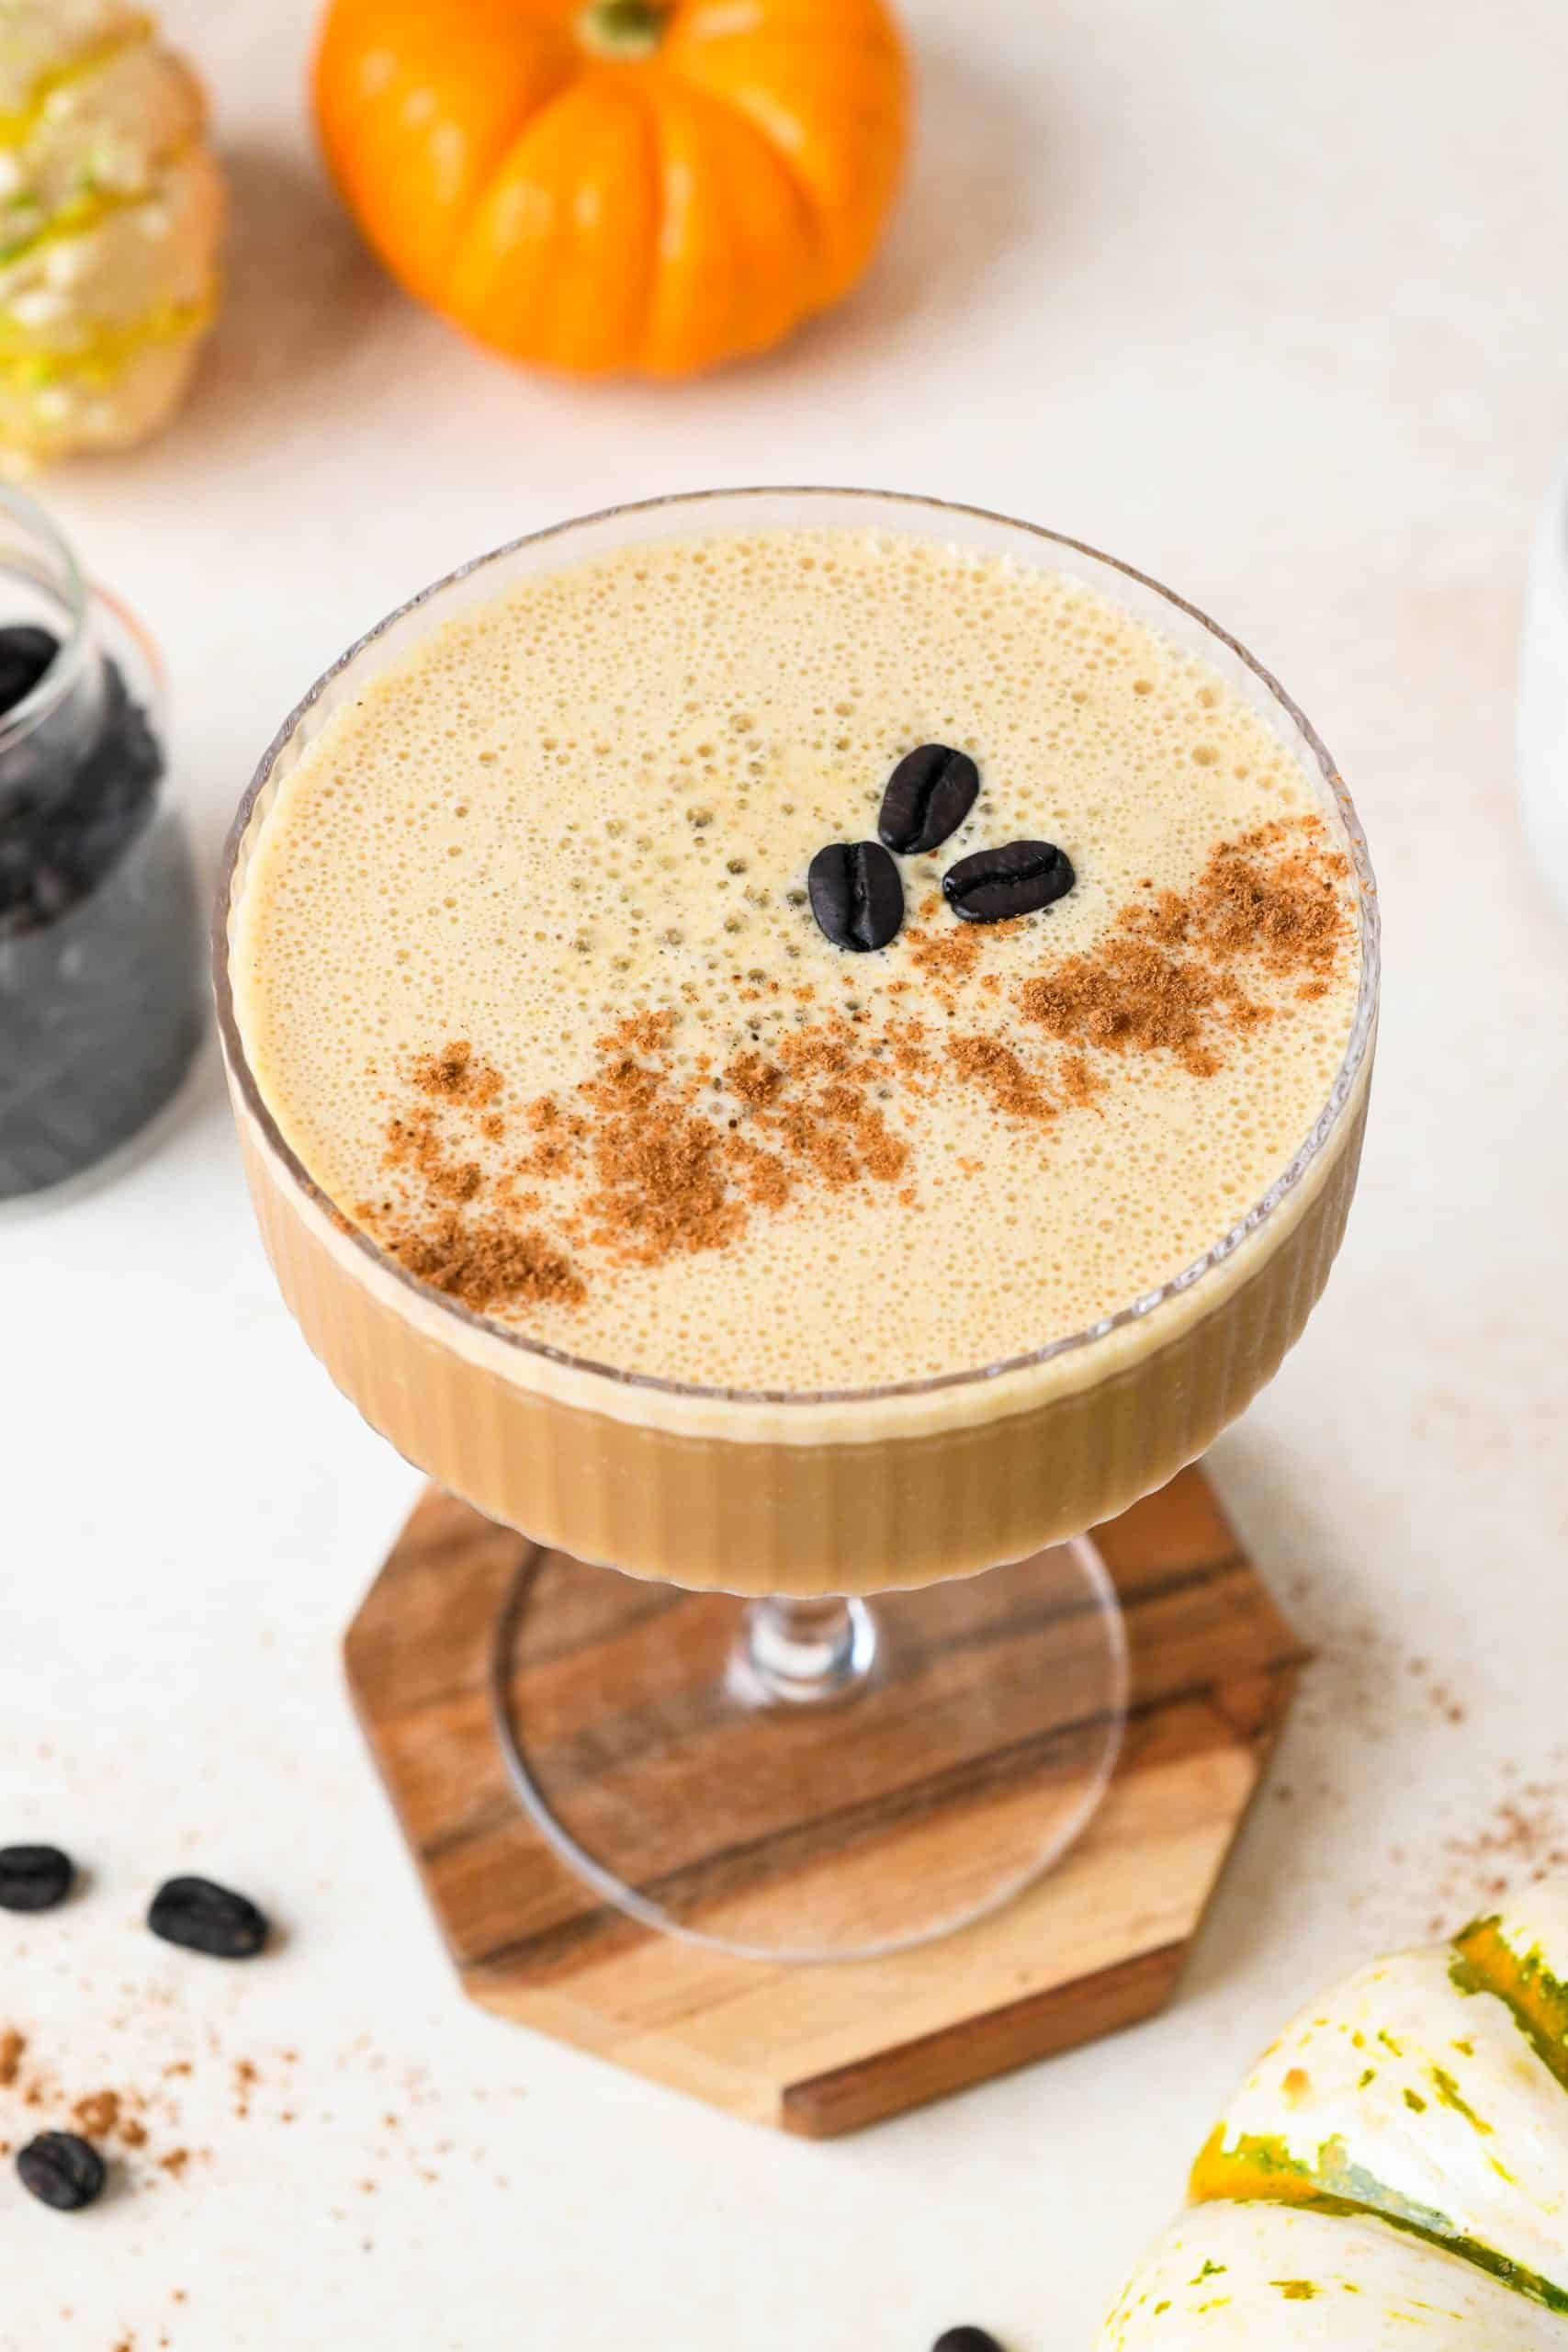 Overhead view of a creamy pumpkin spice espresso martini topped with 3 coffee beans and a dash of pumpkin pie spice, on a creamy background.